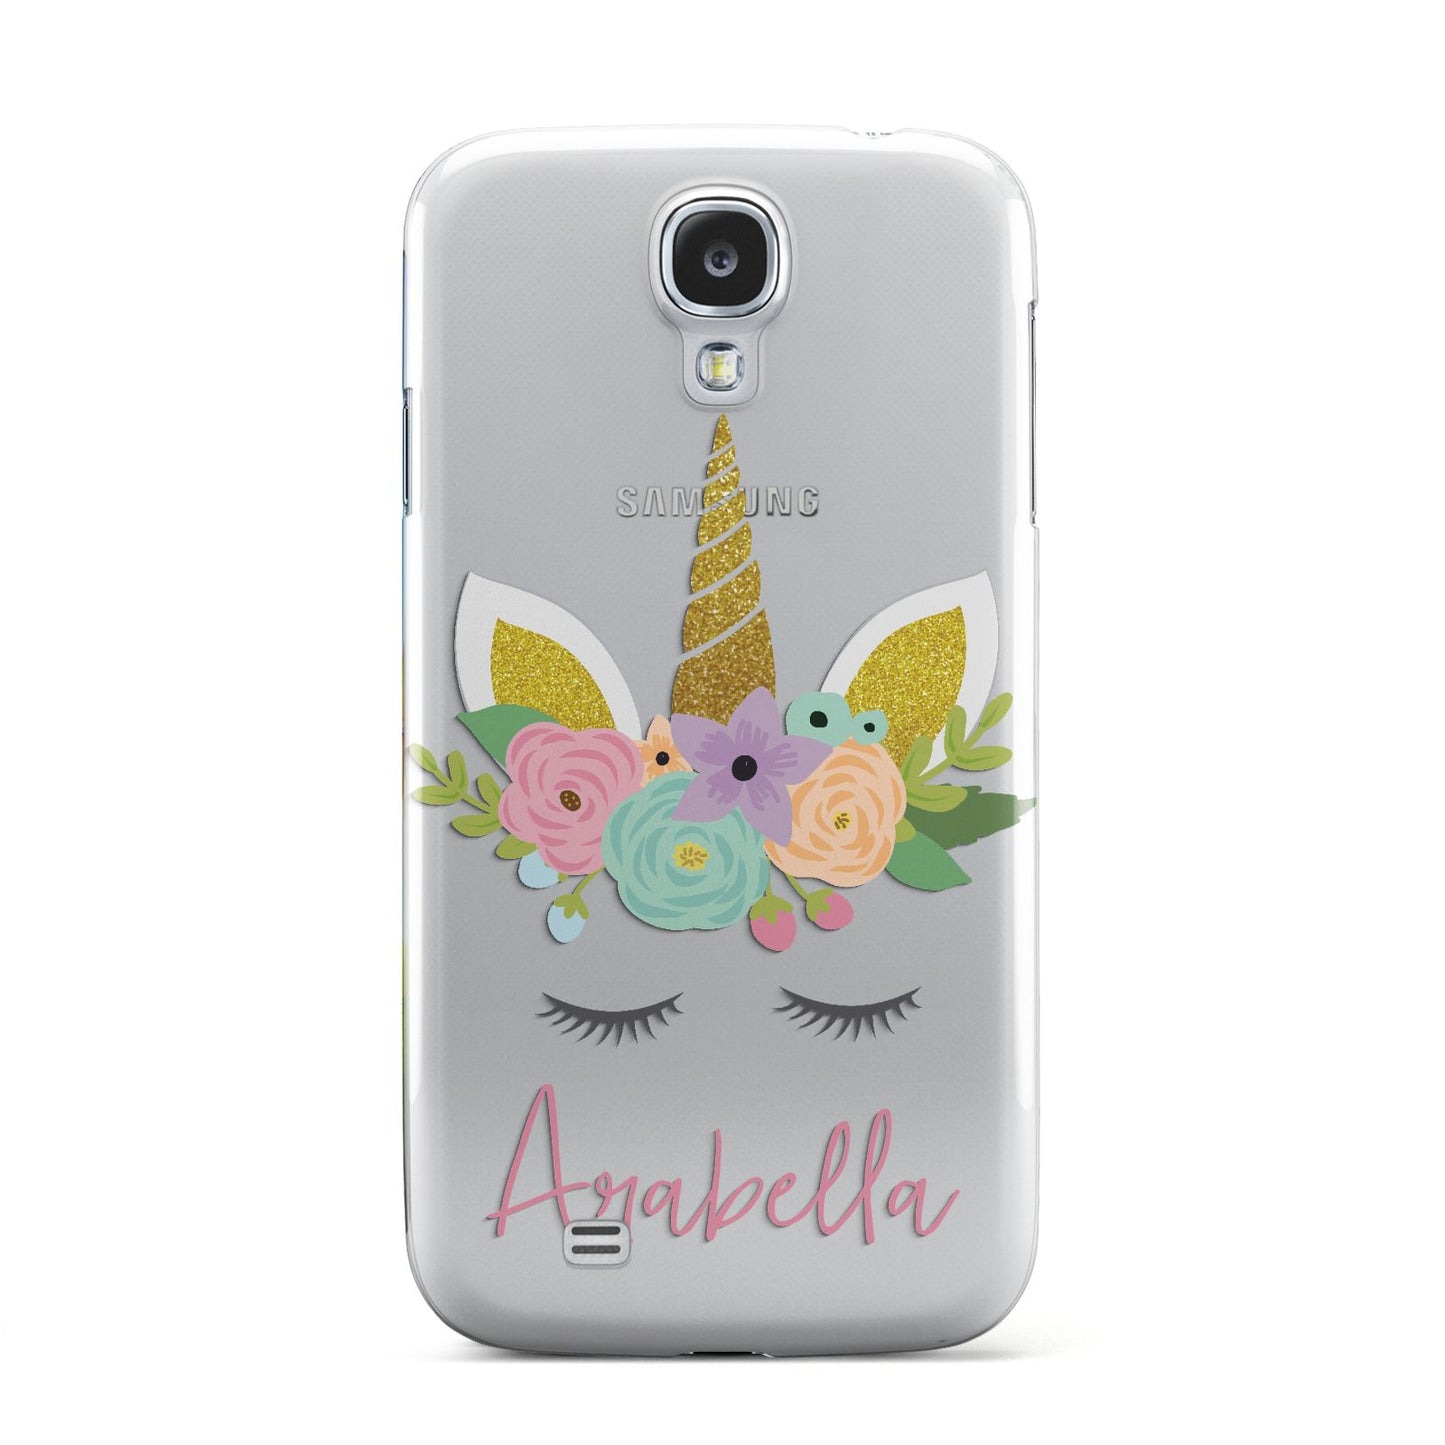 Personalised Unicorn Face Samsung Galaxy S4 Case